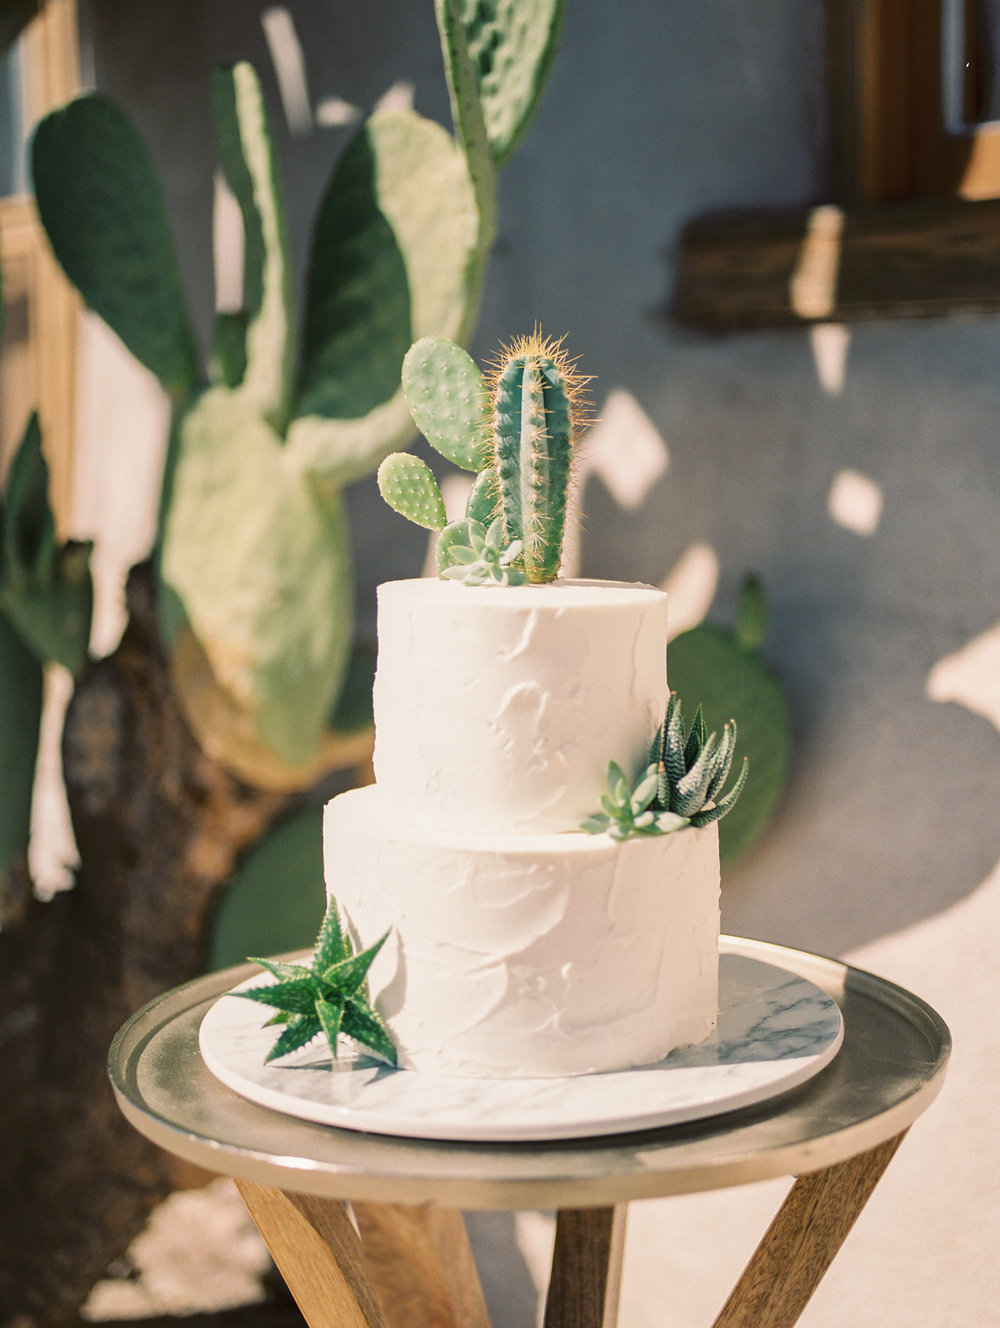  No desert wedding is complete with out a desert cake! Real cactus &amp; succulent cake toppers&nbsp; 